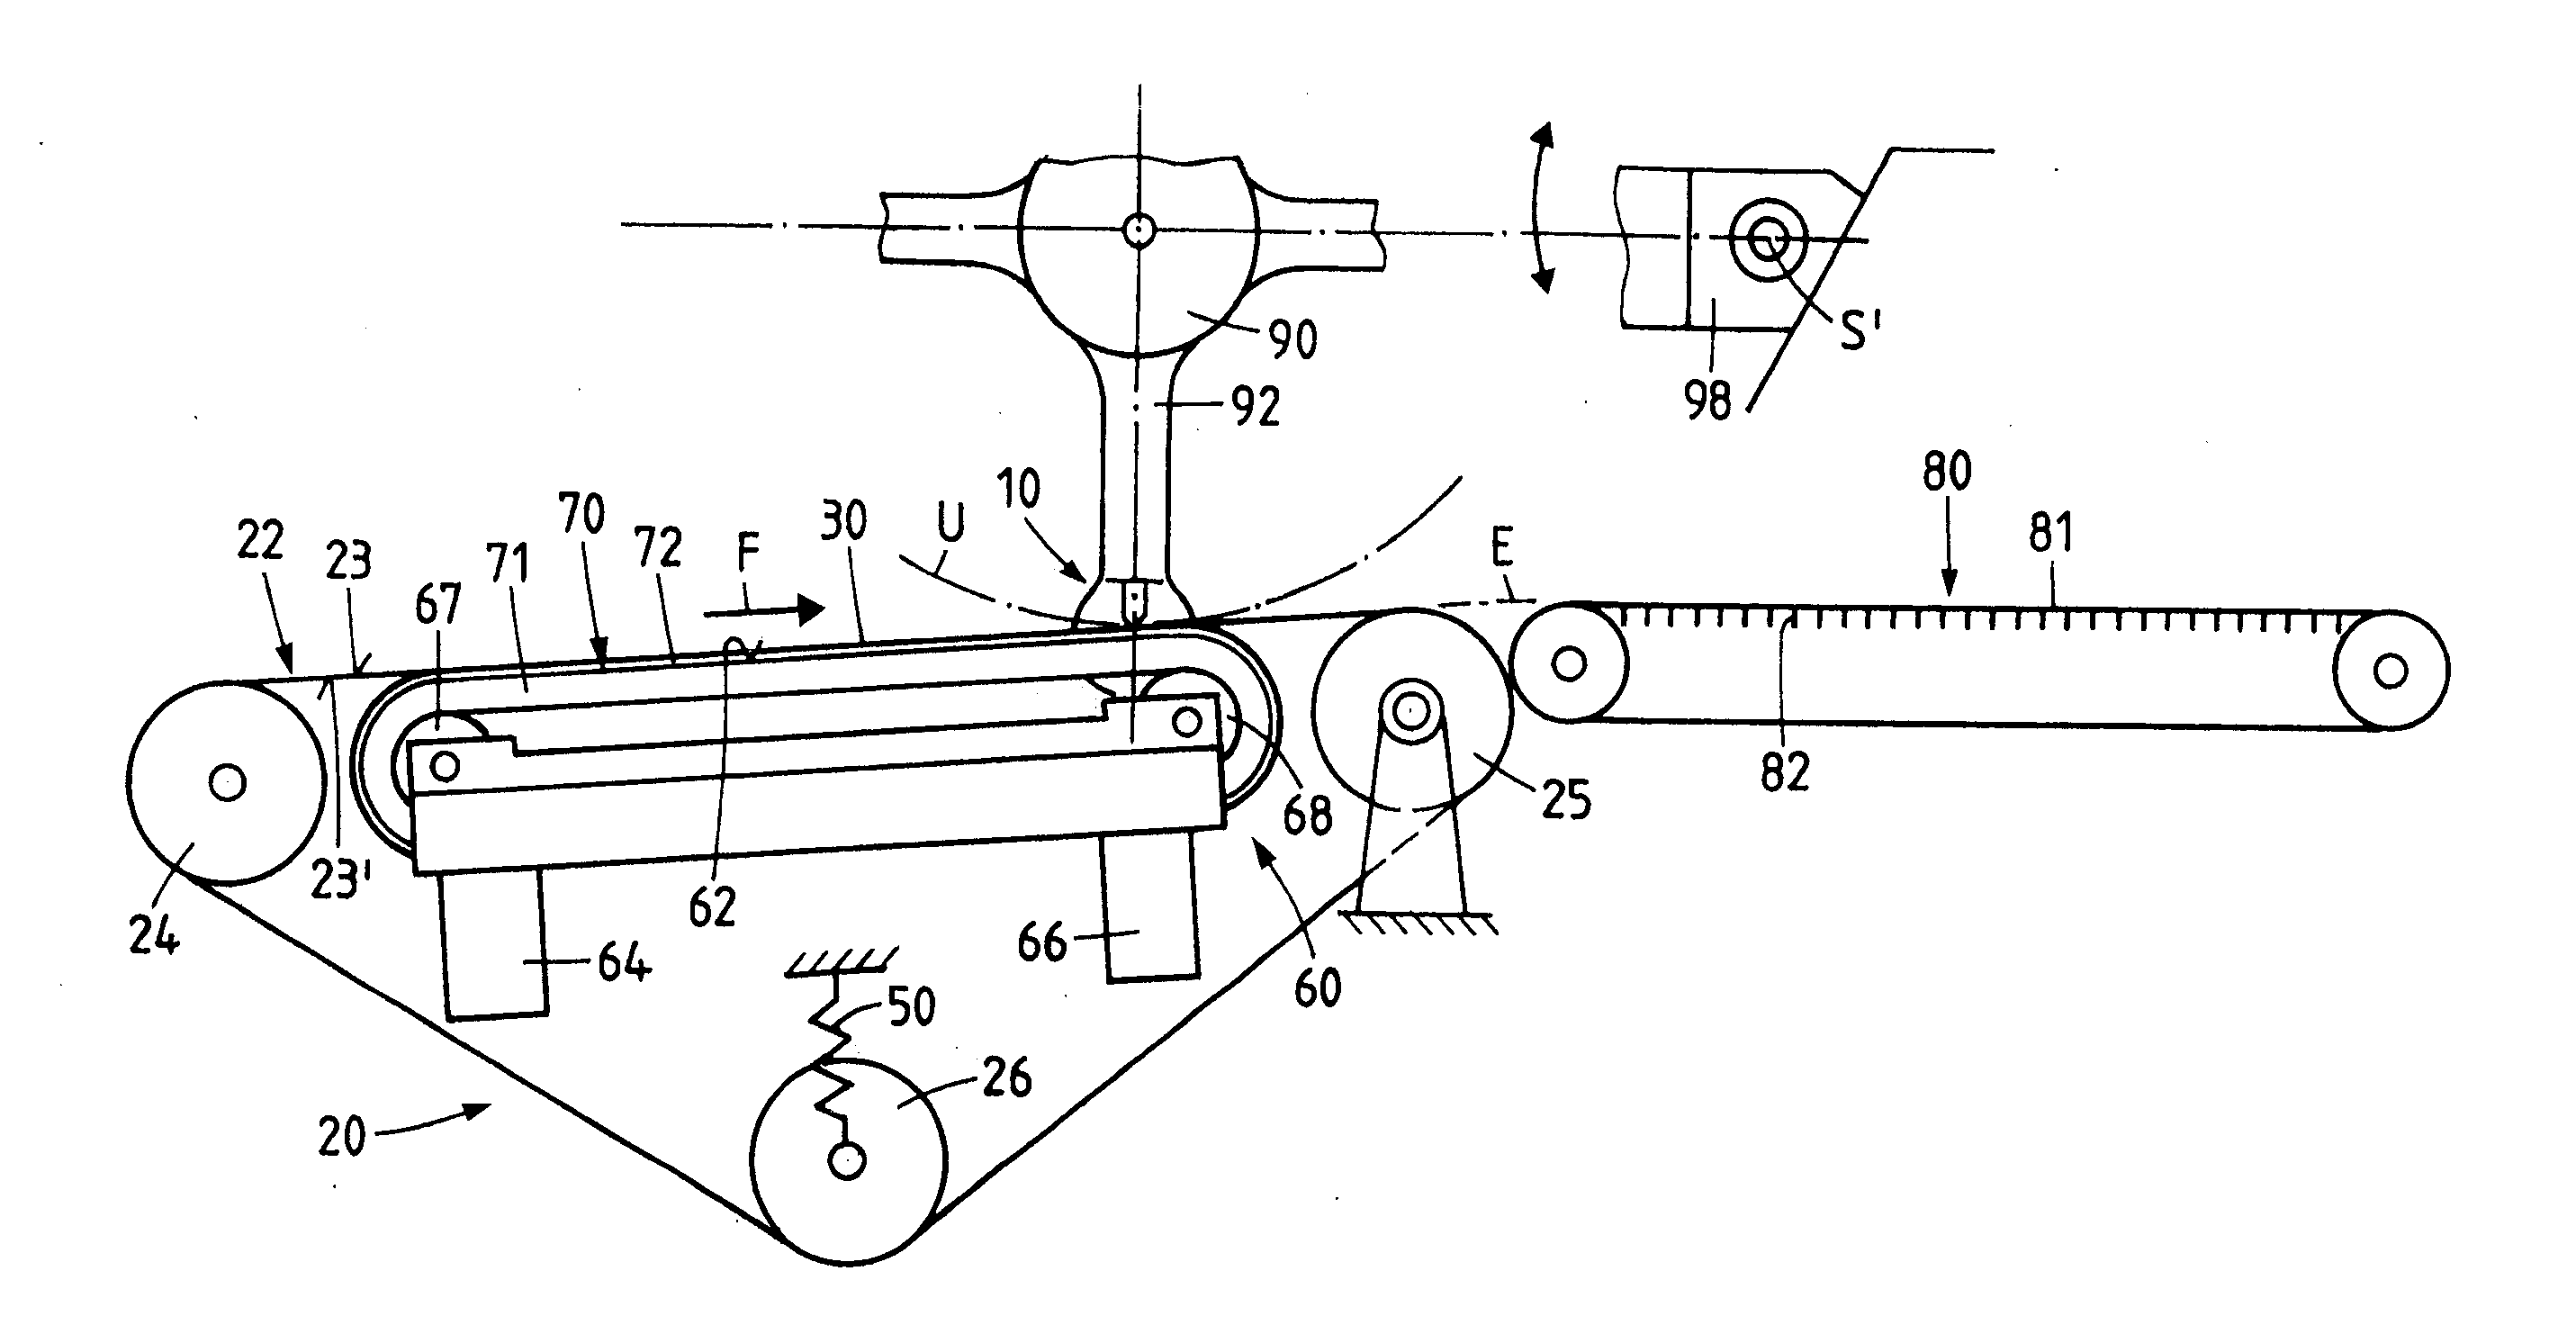 Apparatus for processing flat articles, in particular printed products